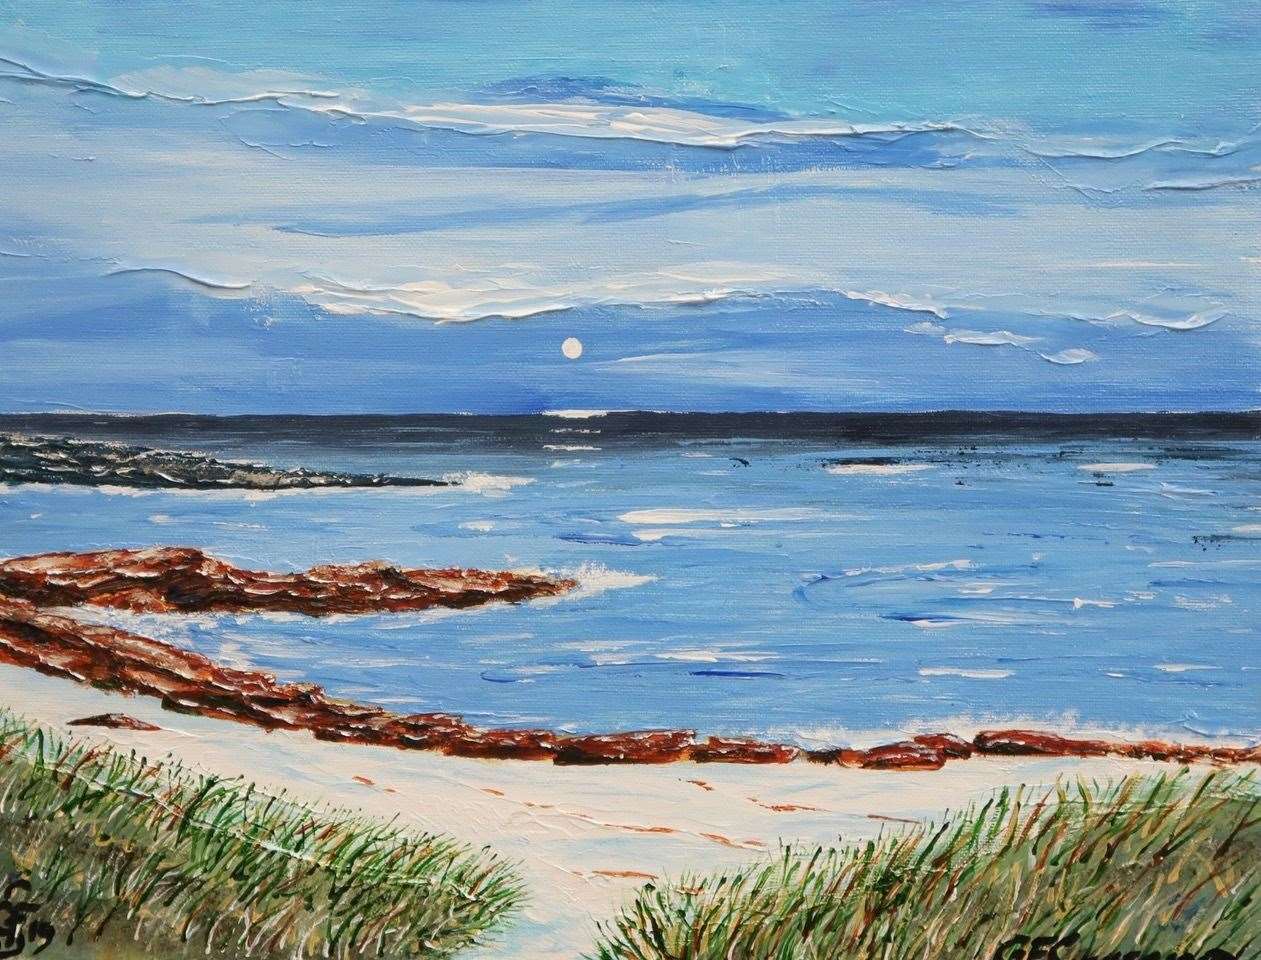 Artwork from George Sutherland who is a member of the East Sutherland Art Society